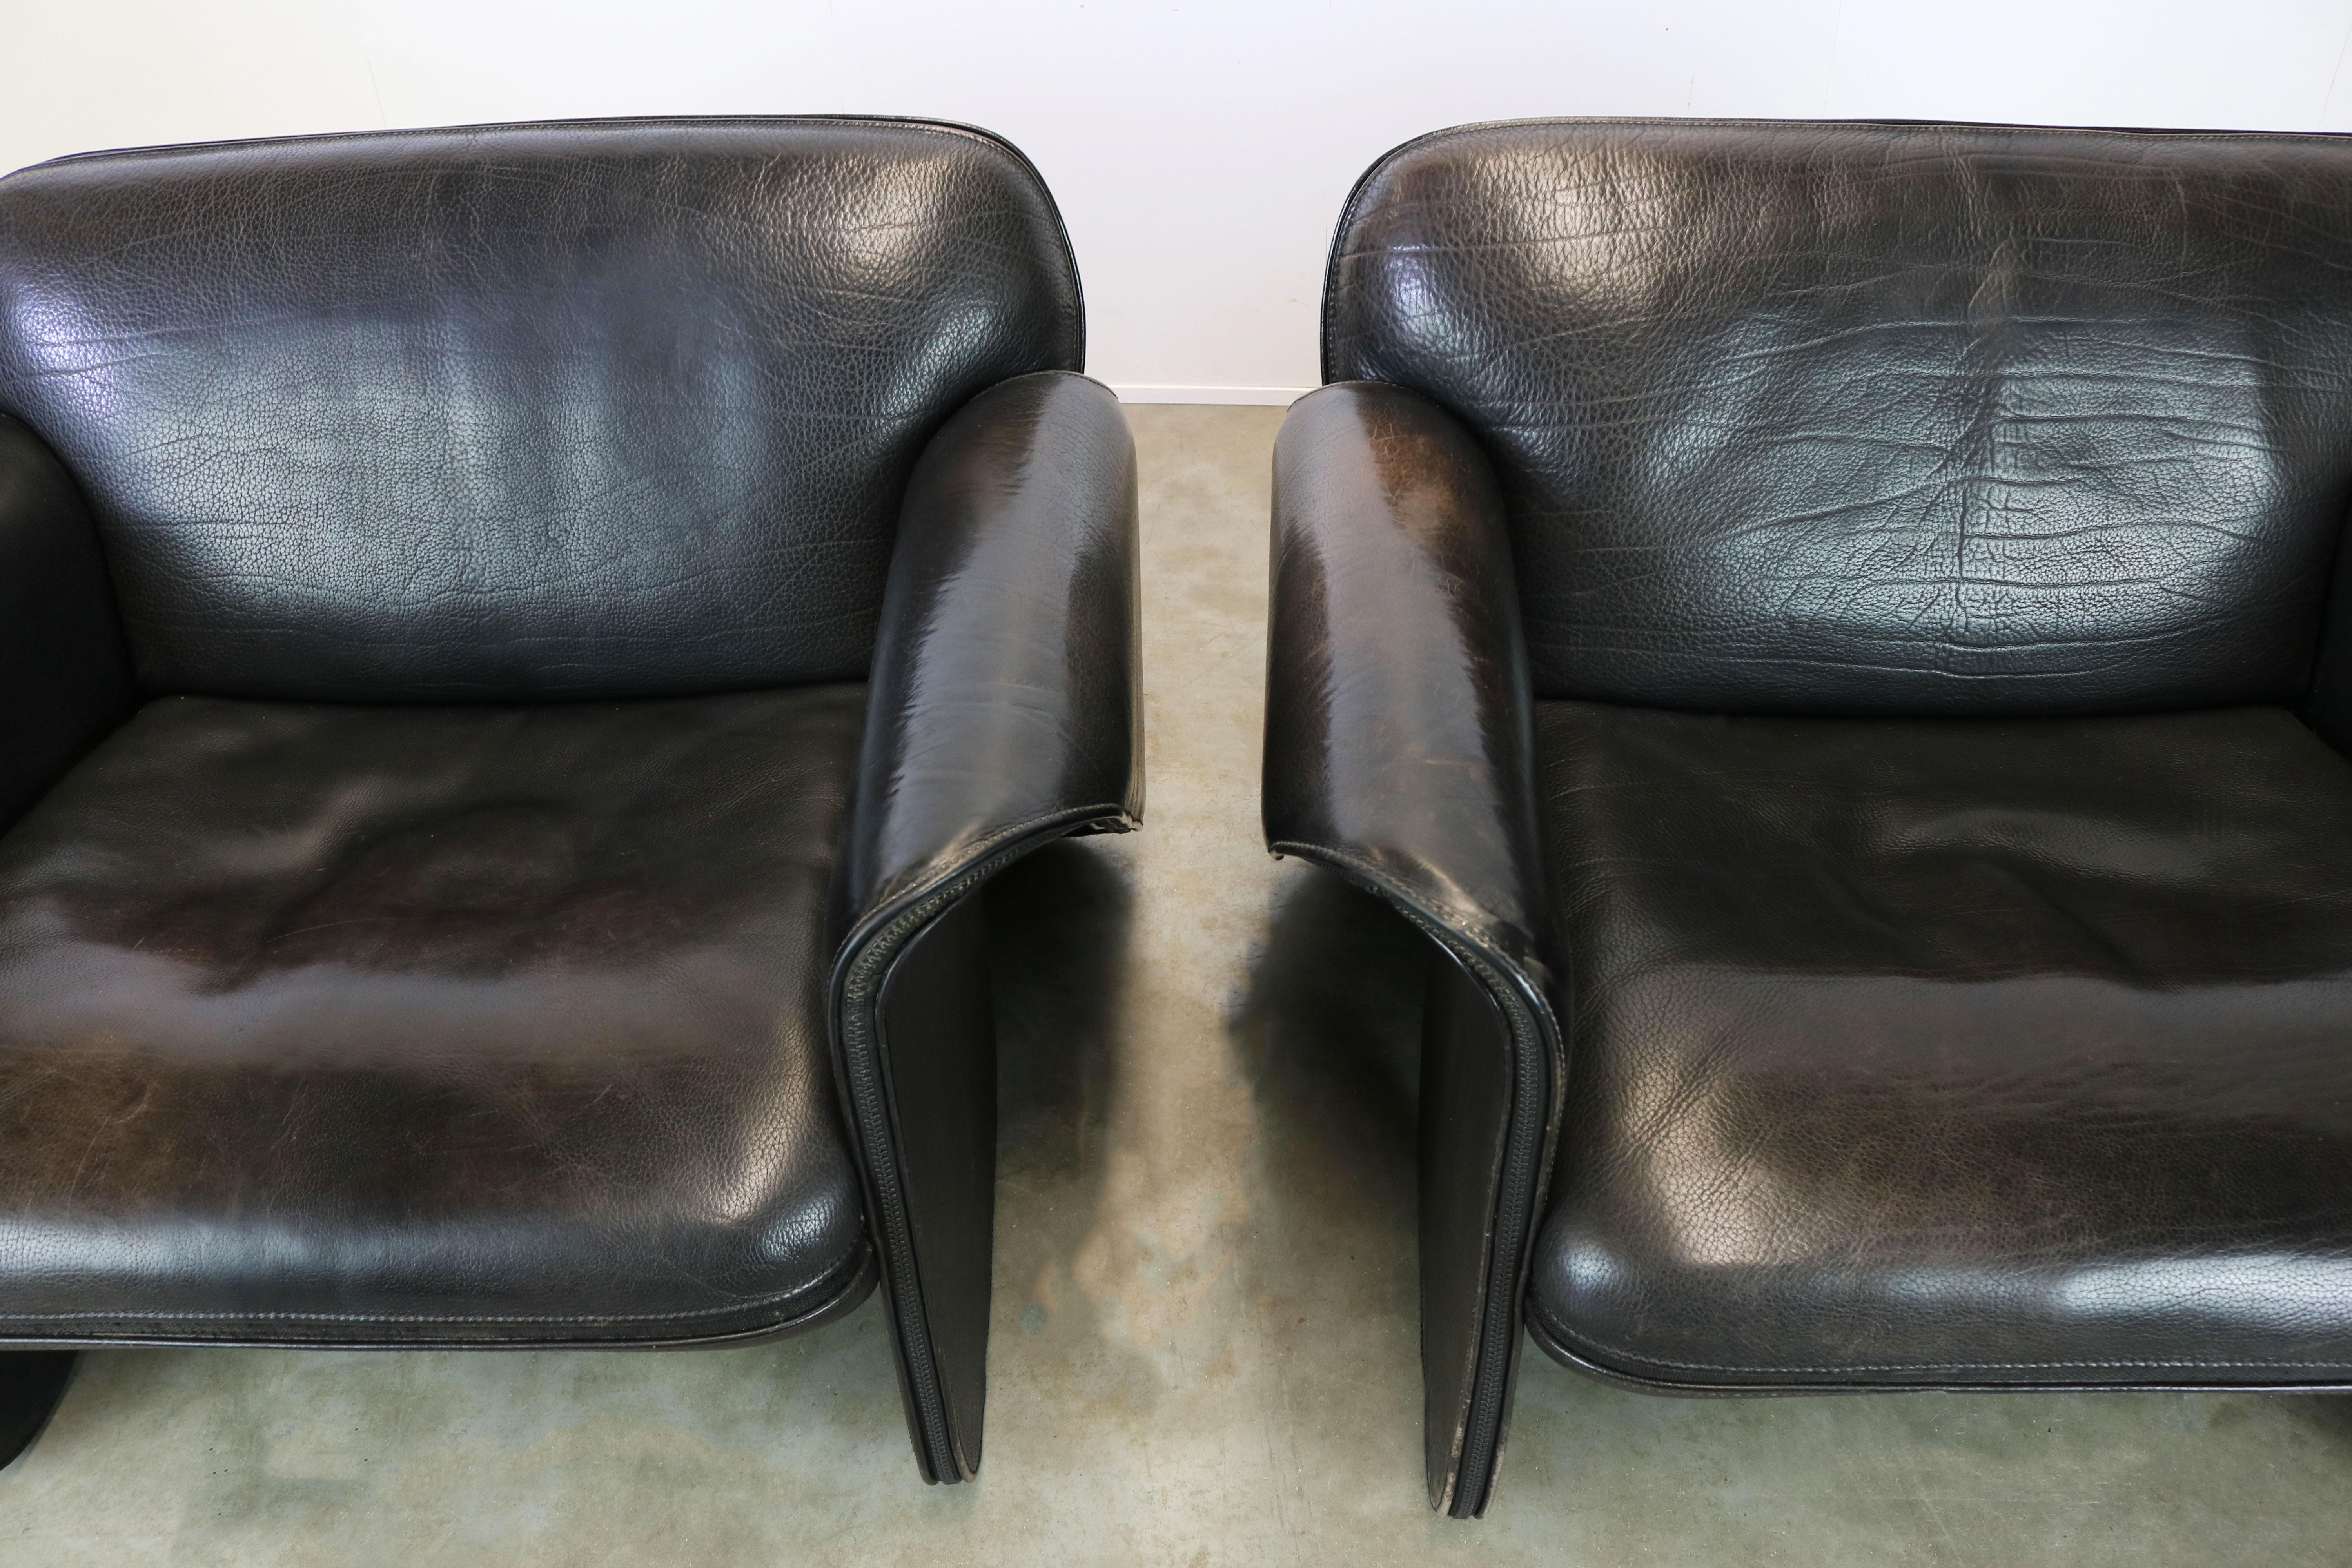 Rare Pair of Swiss De Sede Ds 125 Lounge Chairs by Gerd Lange 1978 Black Leather 4